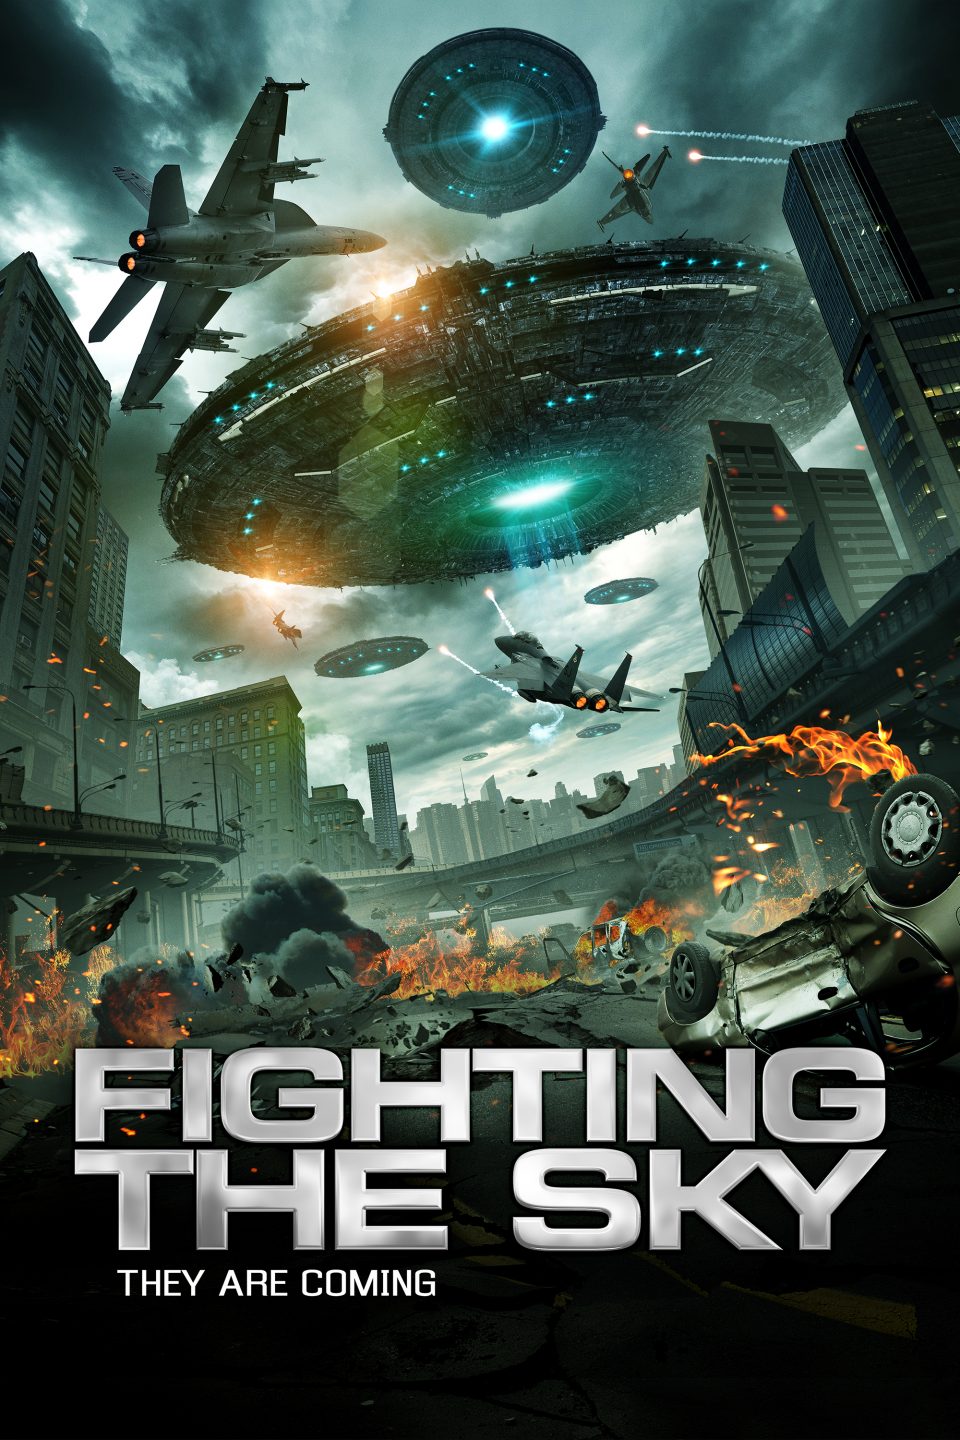 Fighting The Sky poster (High Octane Pictures)